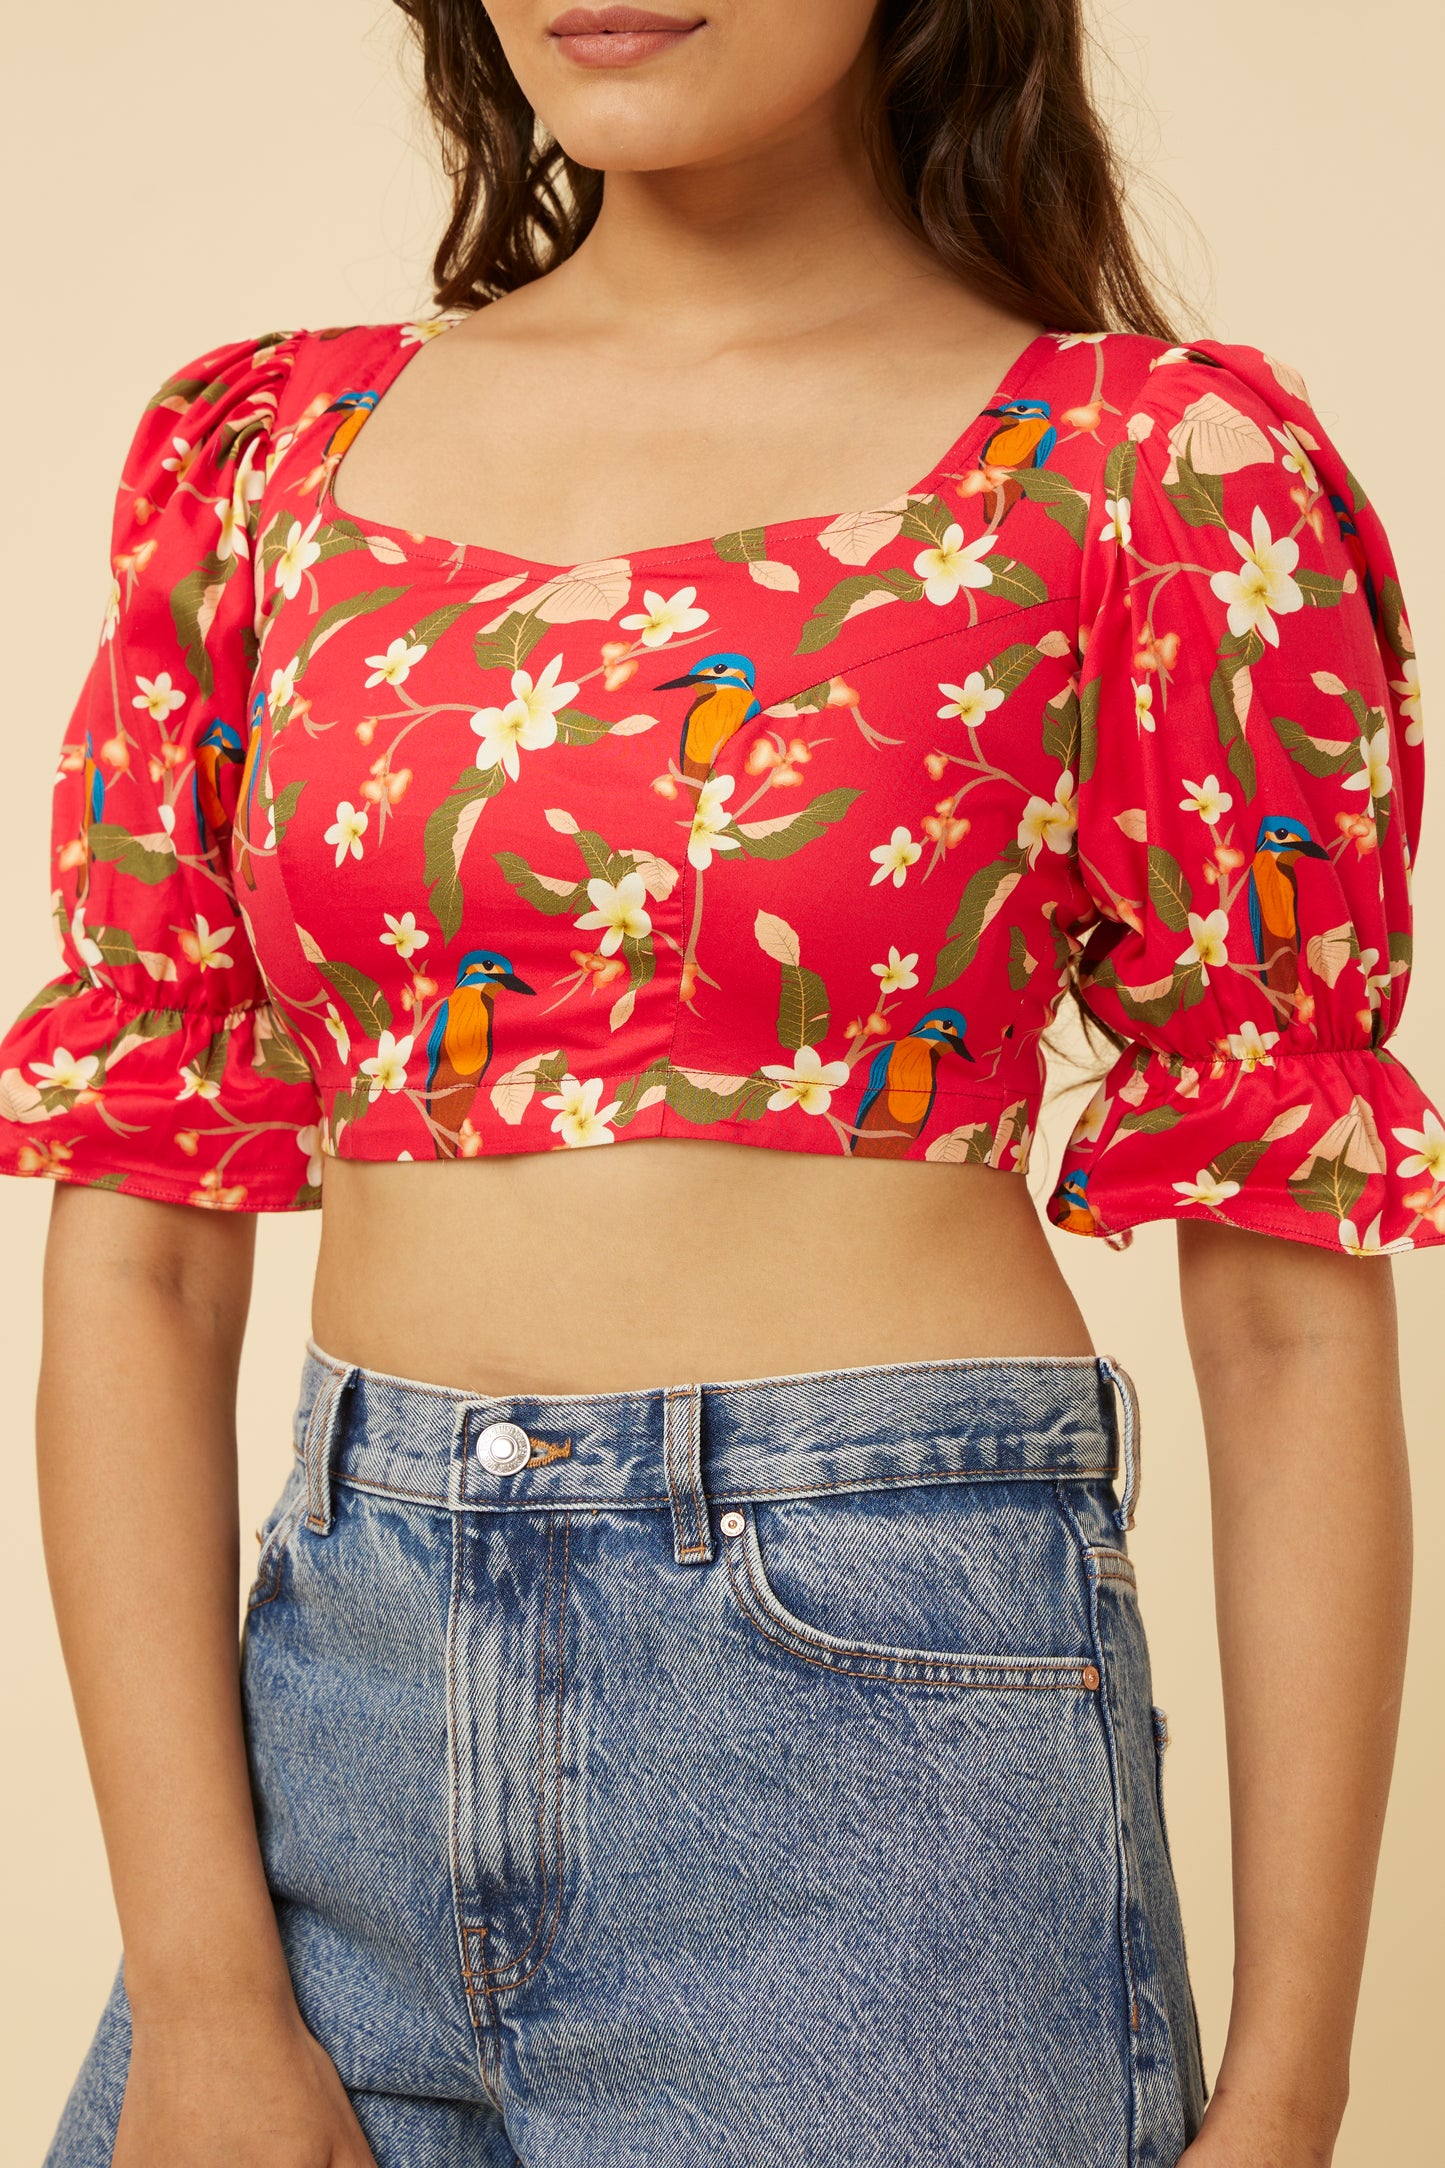 Detailed close-up of the Crimson Summery Crop Top’s sweetheart neckline and puff sleeves, the frills adding a touch of playfulness to the sophisticated floral and bird pattern.